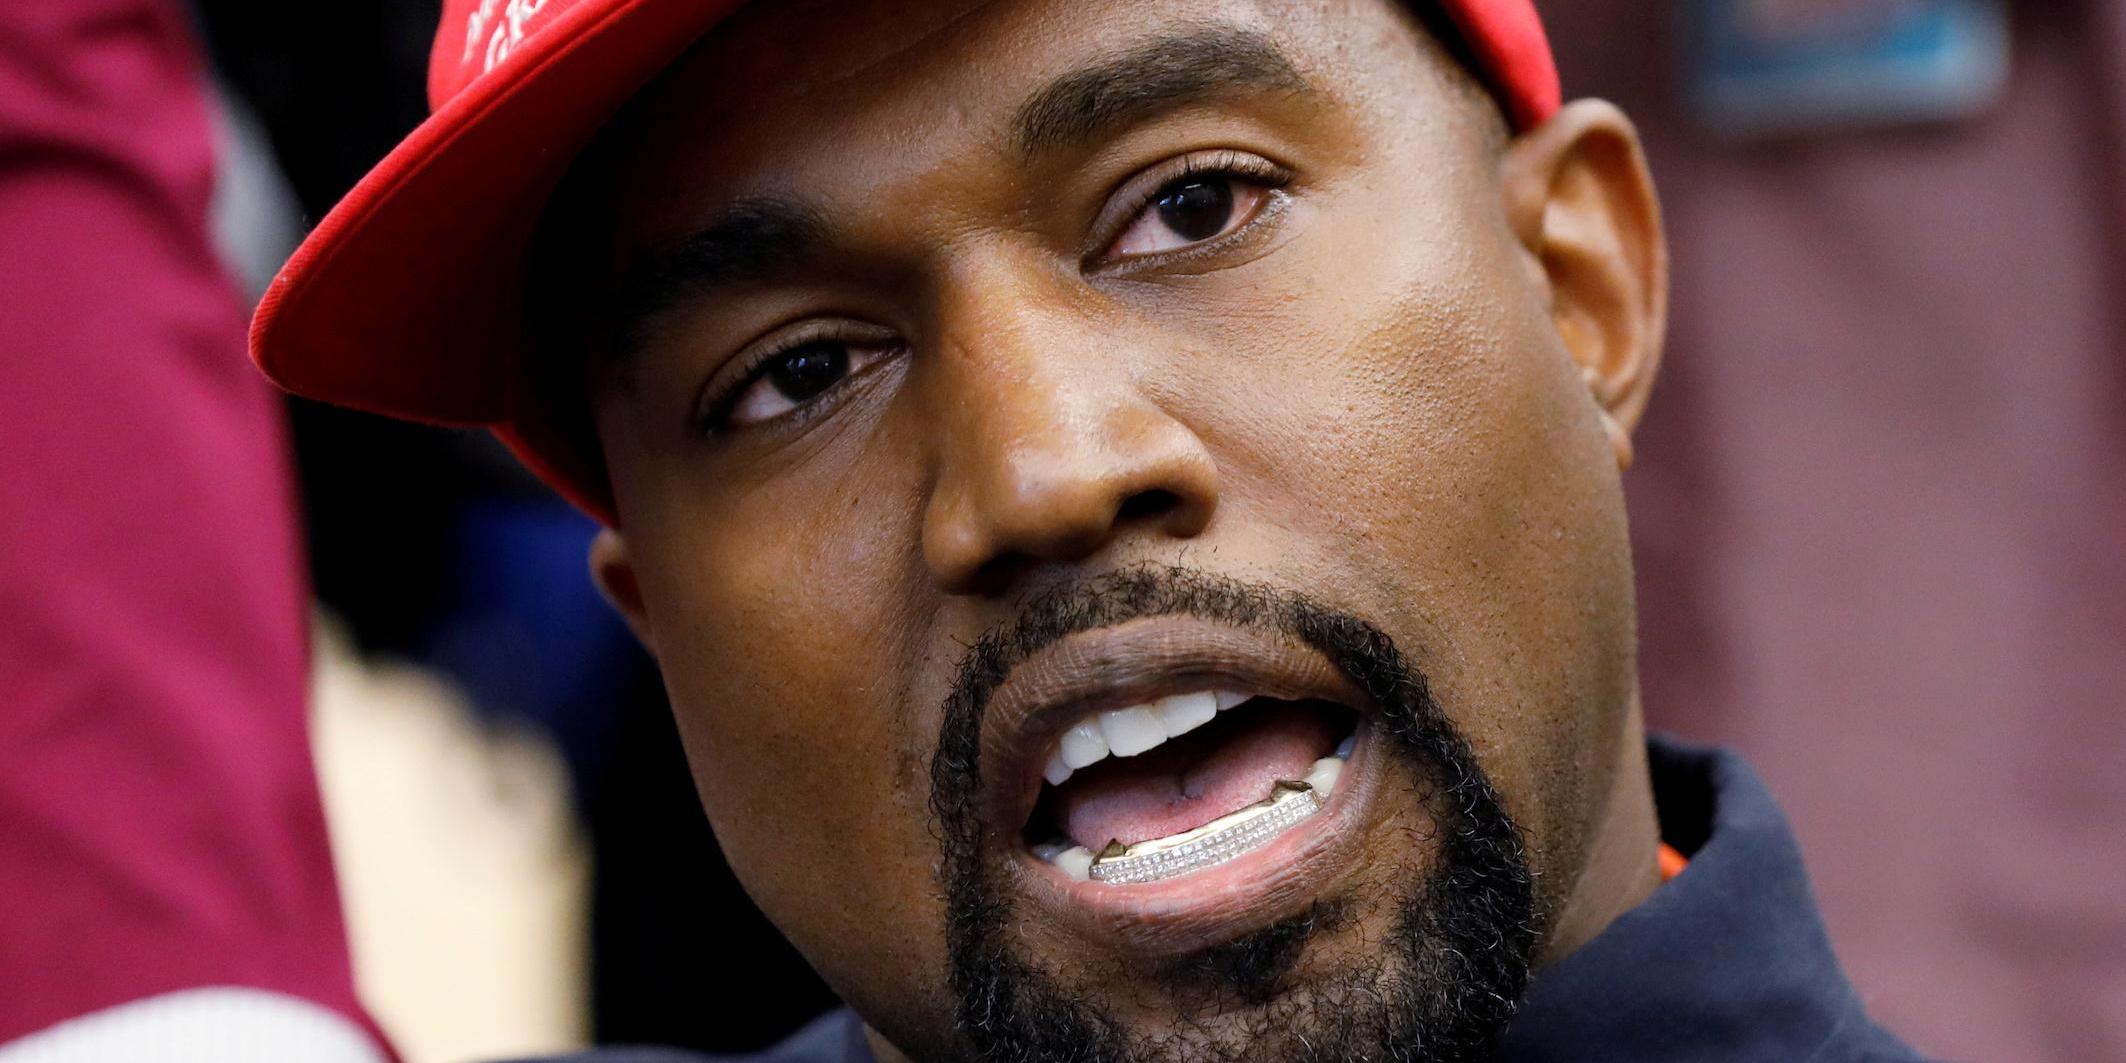 Goodbye Kanye West, hello Ye: Judge approves name change request